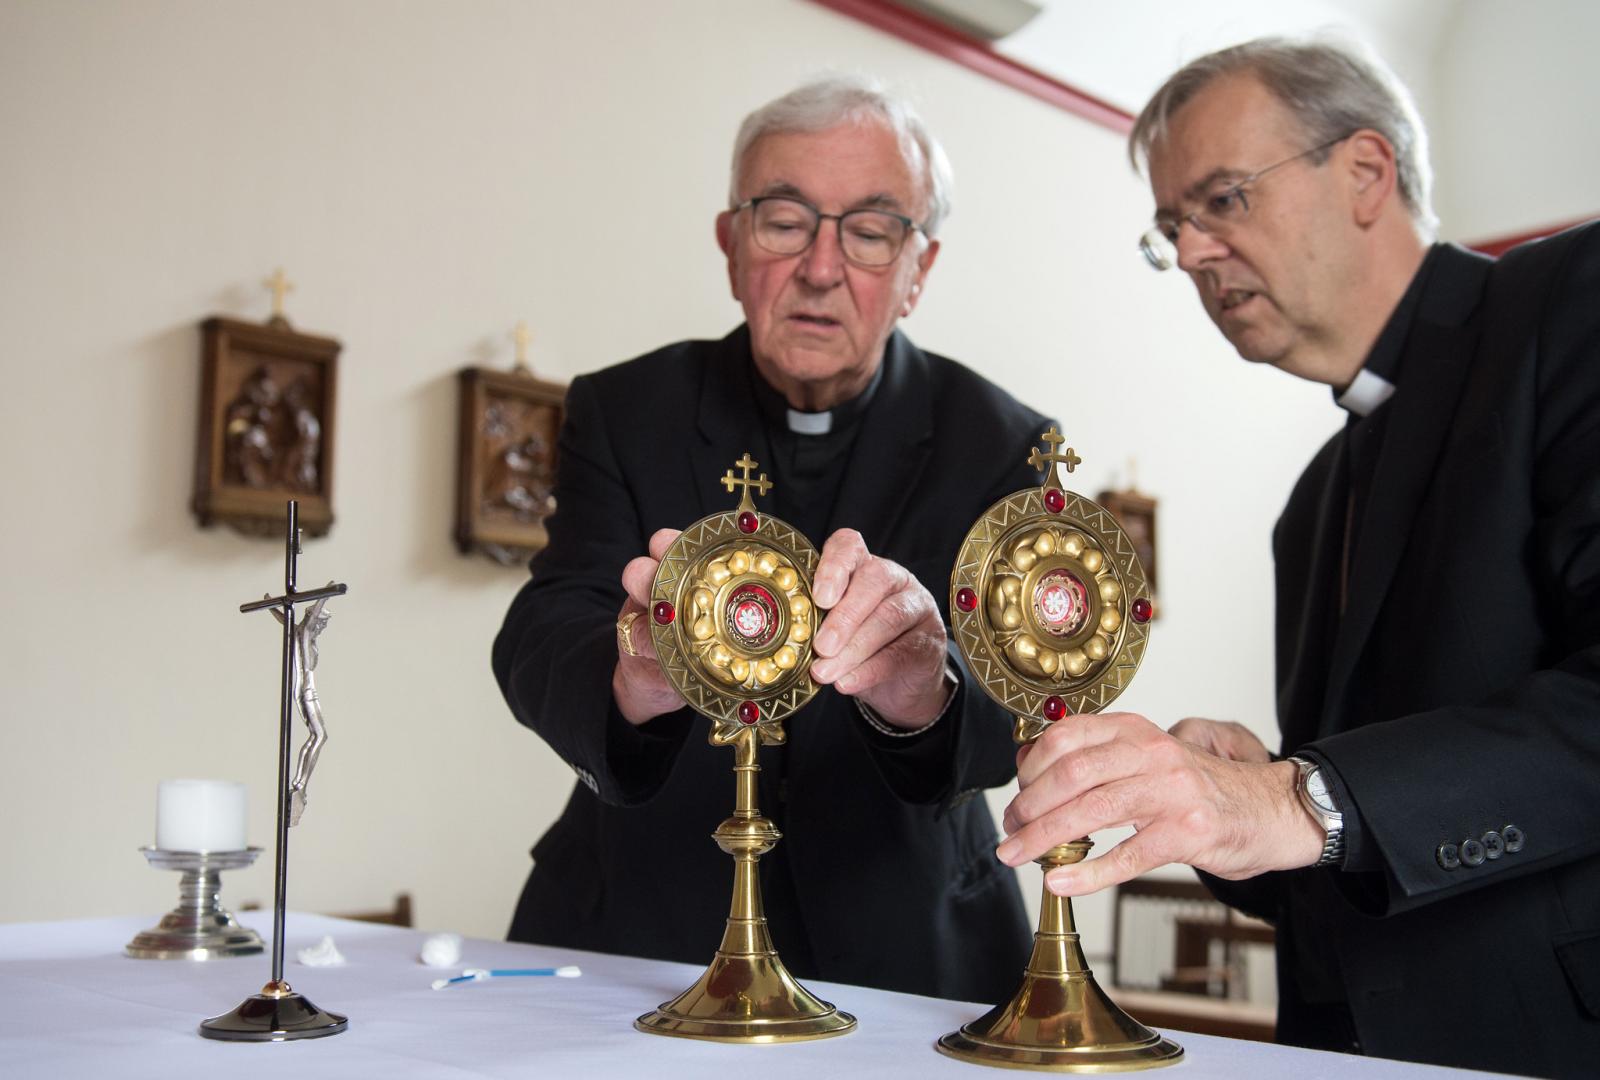 Two parishes receive relics of Blessed Carlo Acutis Diocese of